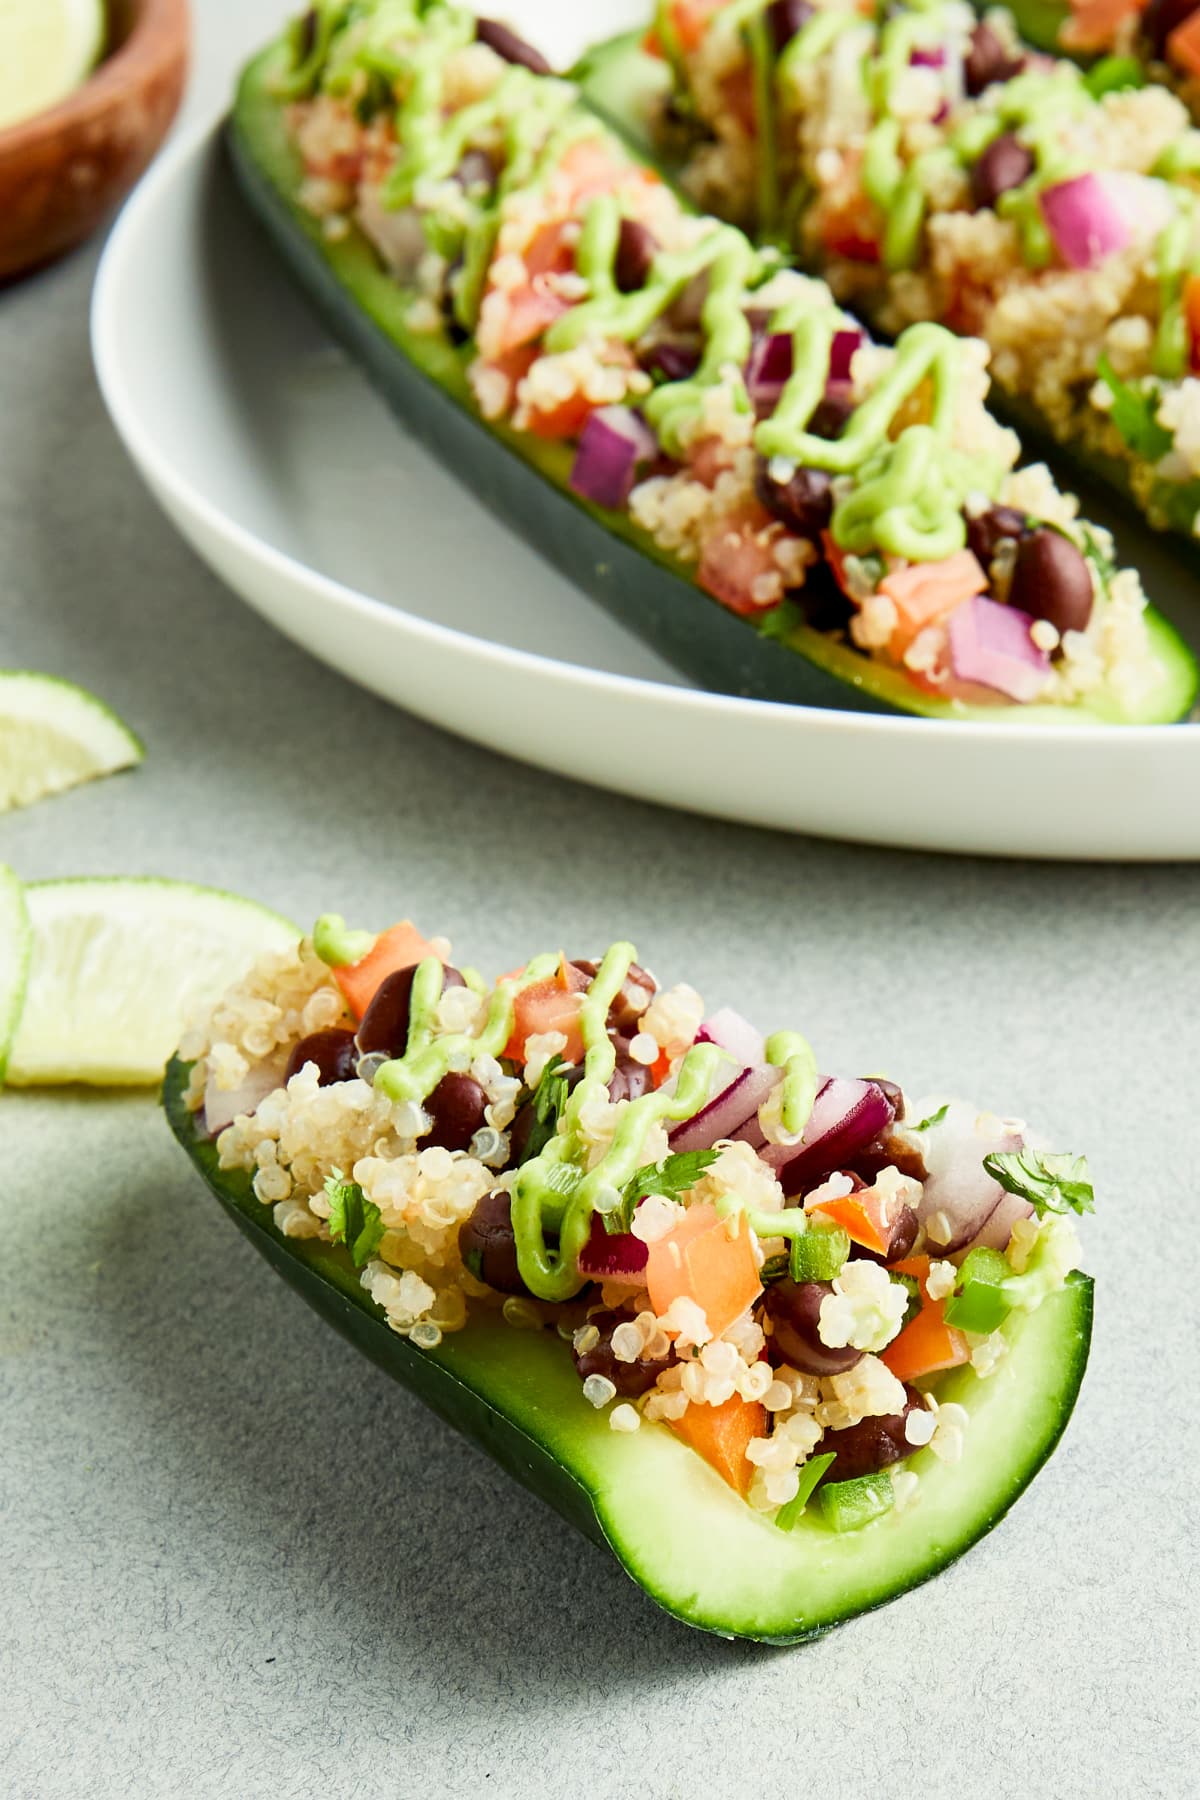 One half cucumber boat filled with a Mexican mixture of beans, quinoa, tomato and onion, and drizzled with a tangy avocado sauce sits on a grey surface in front of a serving plate of full tex mex cucumber boats.